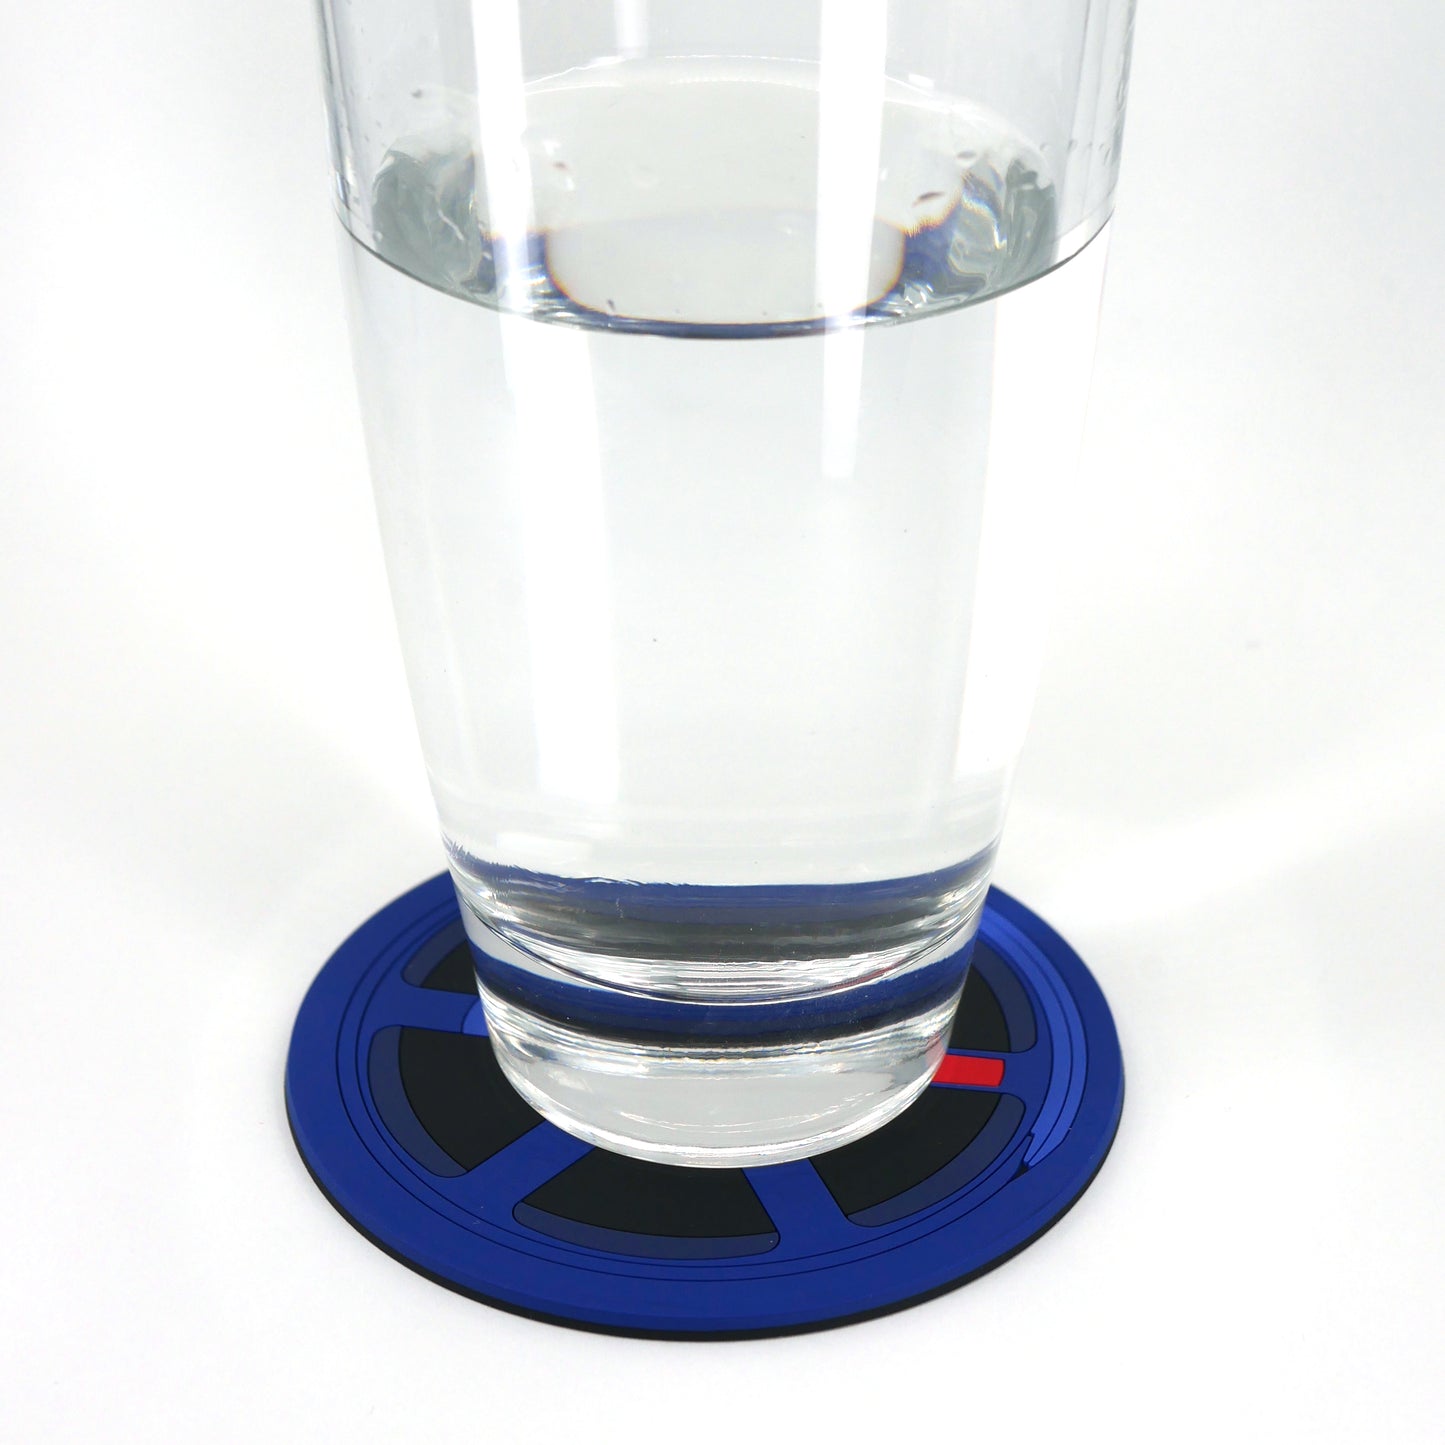 A glass of water sitting on a blue TE wheel PVC rubber coaster.